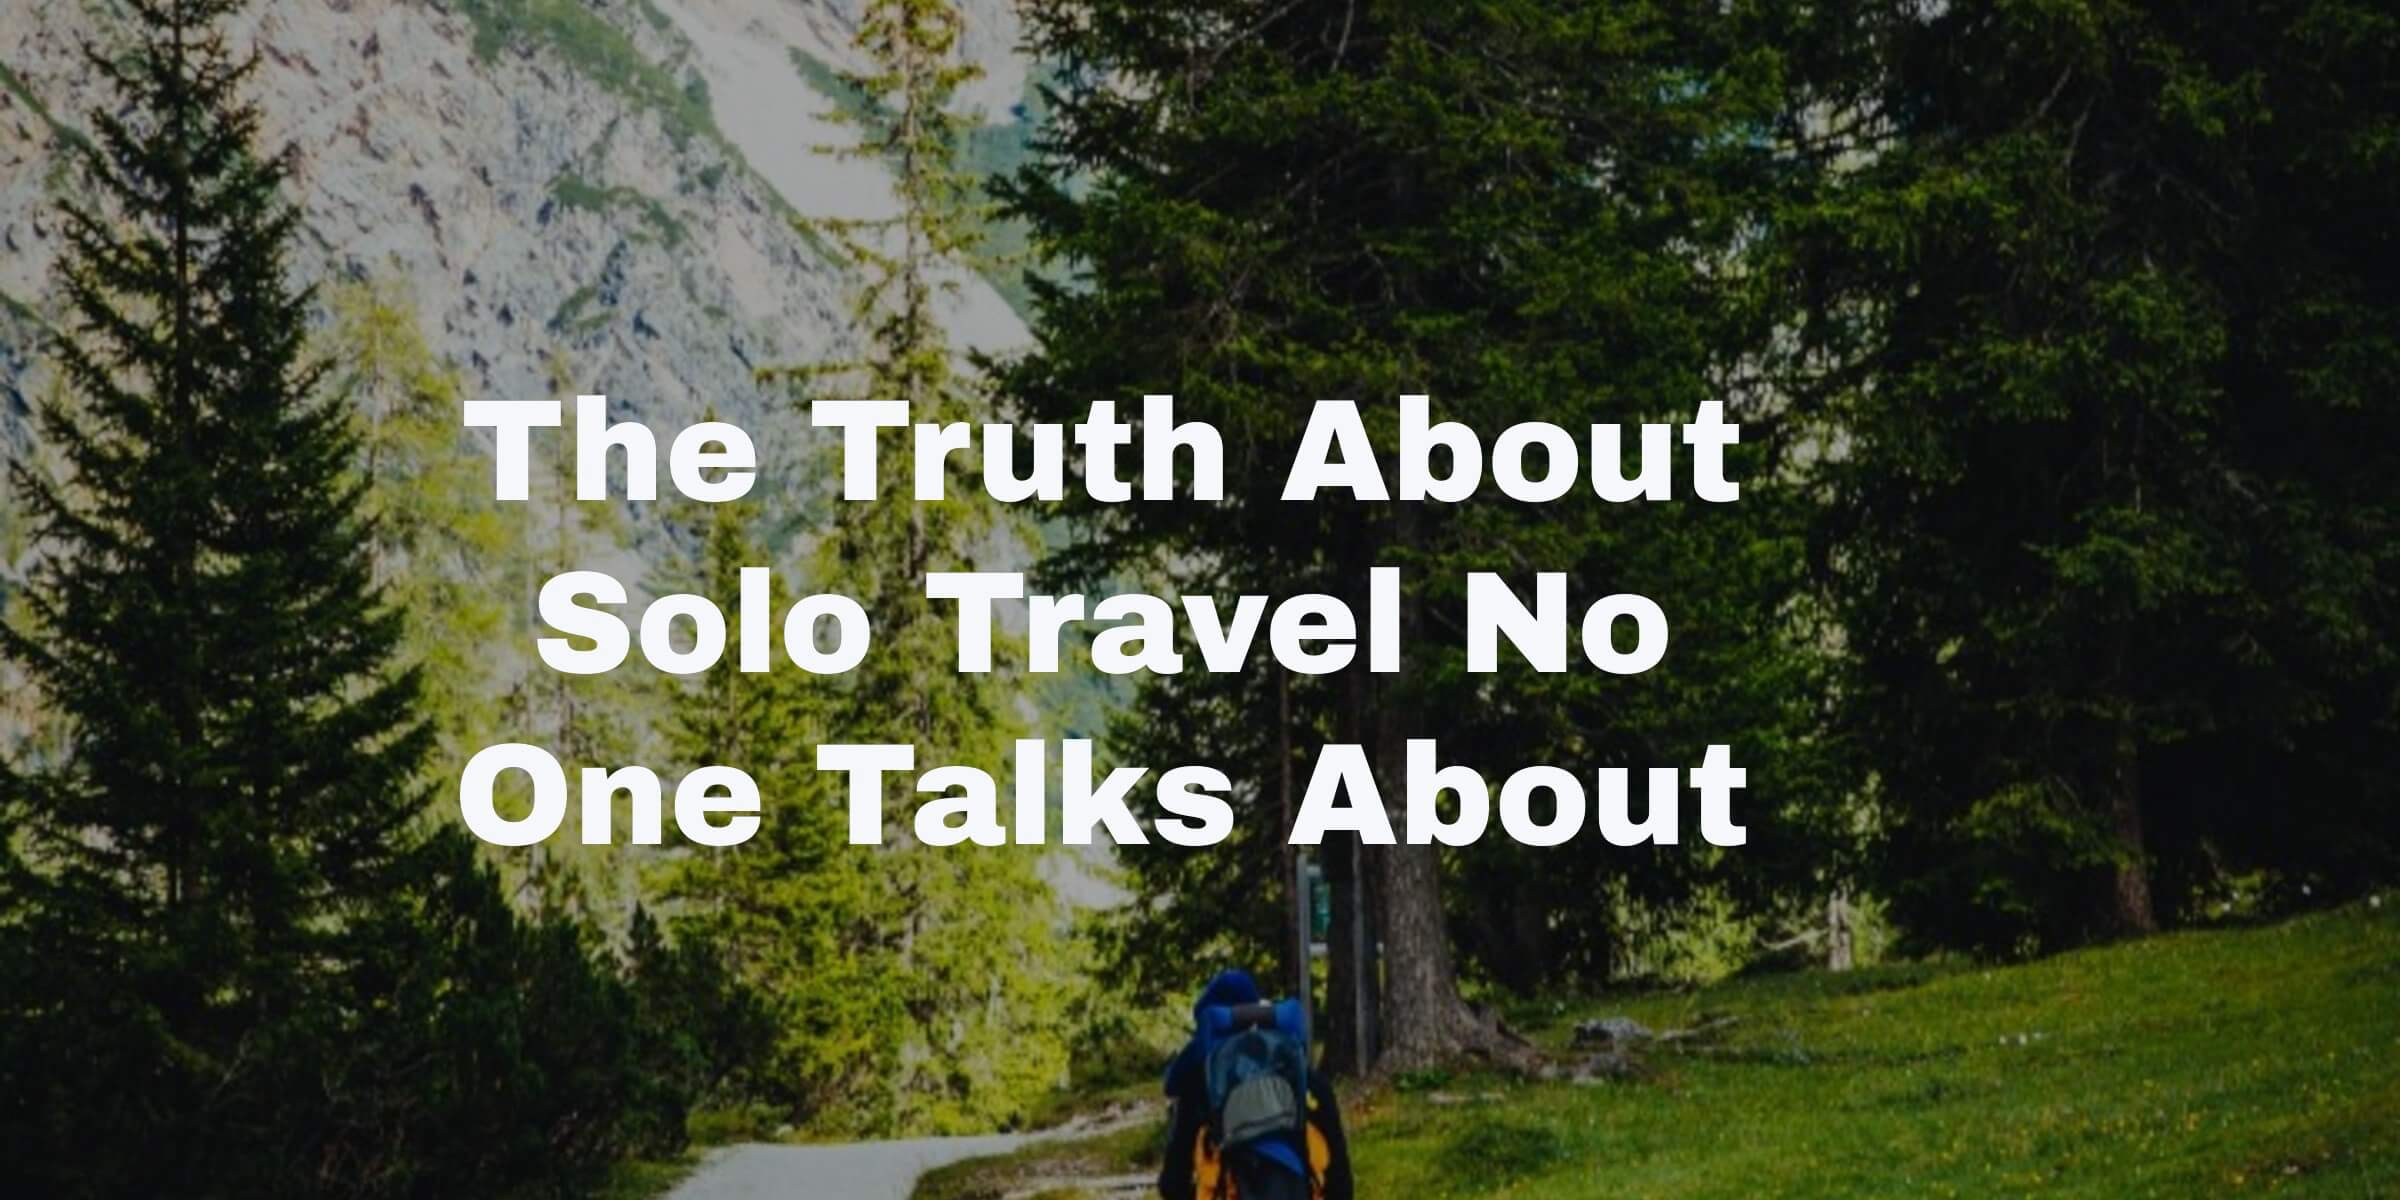 The Truth About Solo Travel No One Talks About